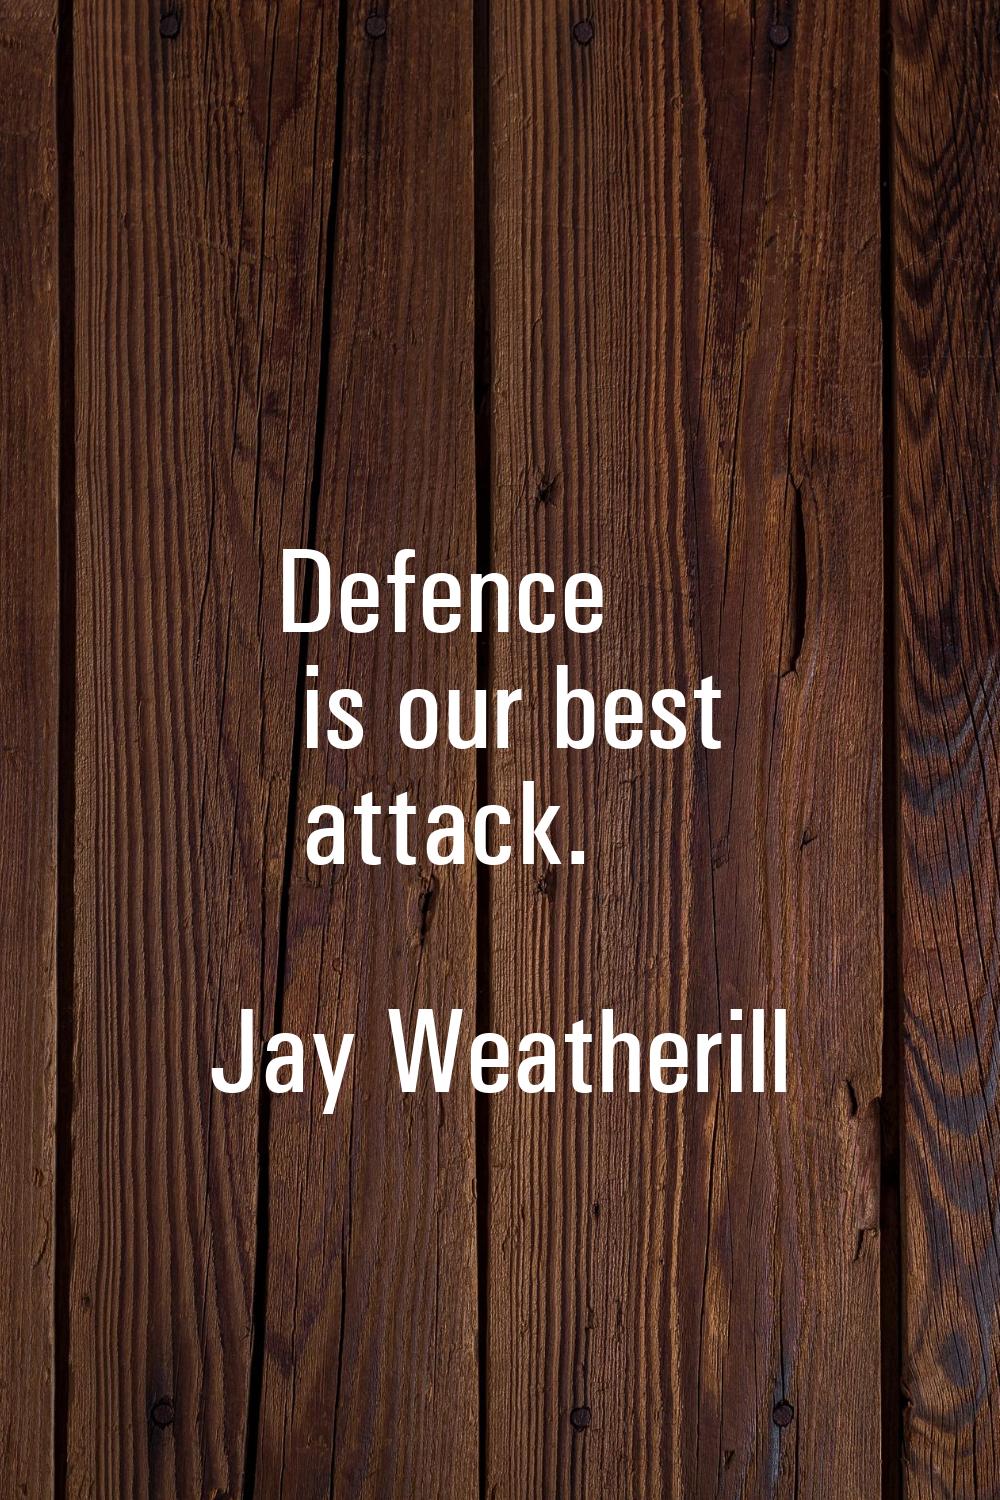 Defence is our best attack.